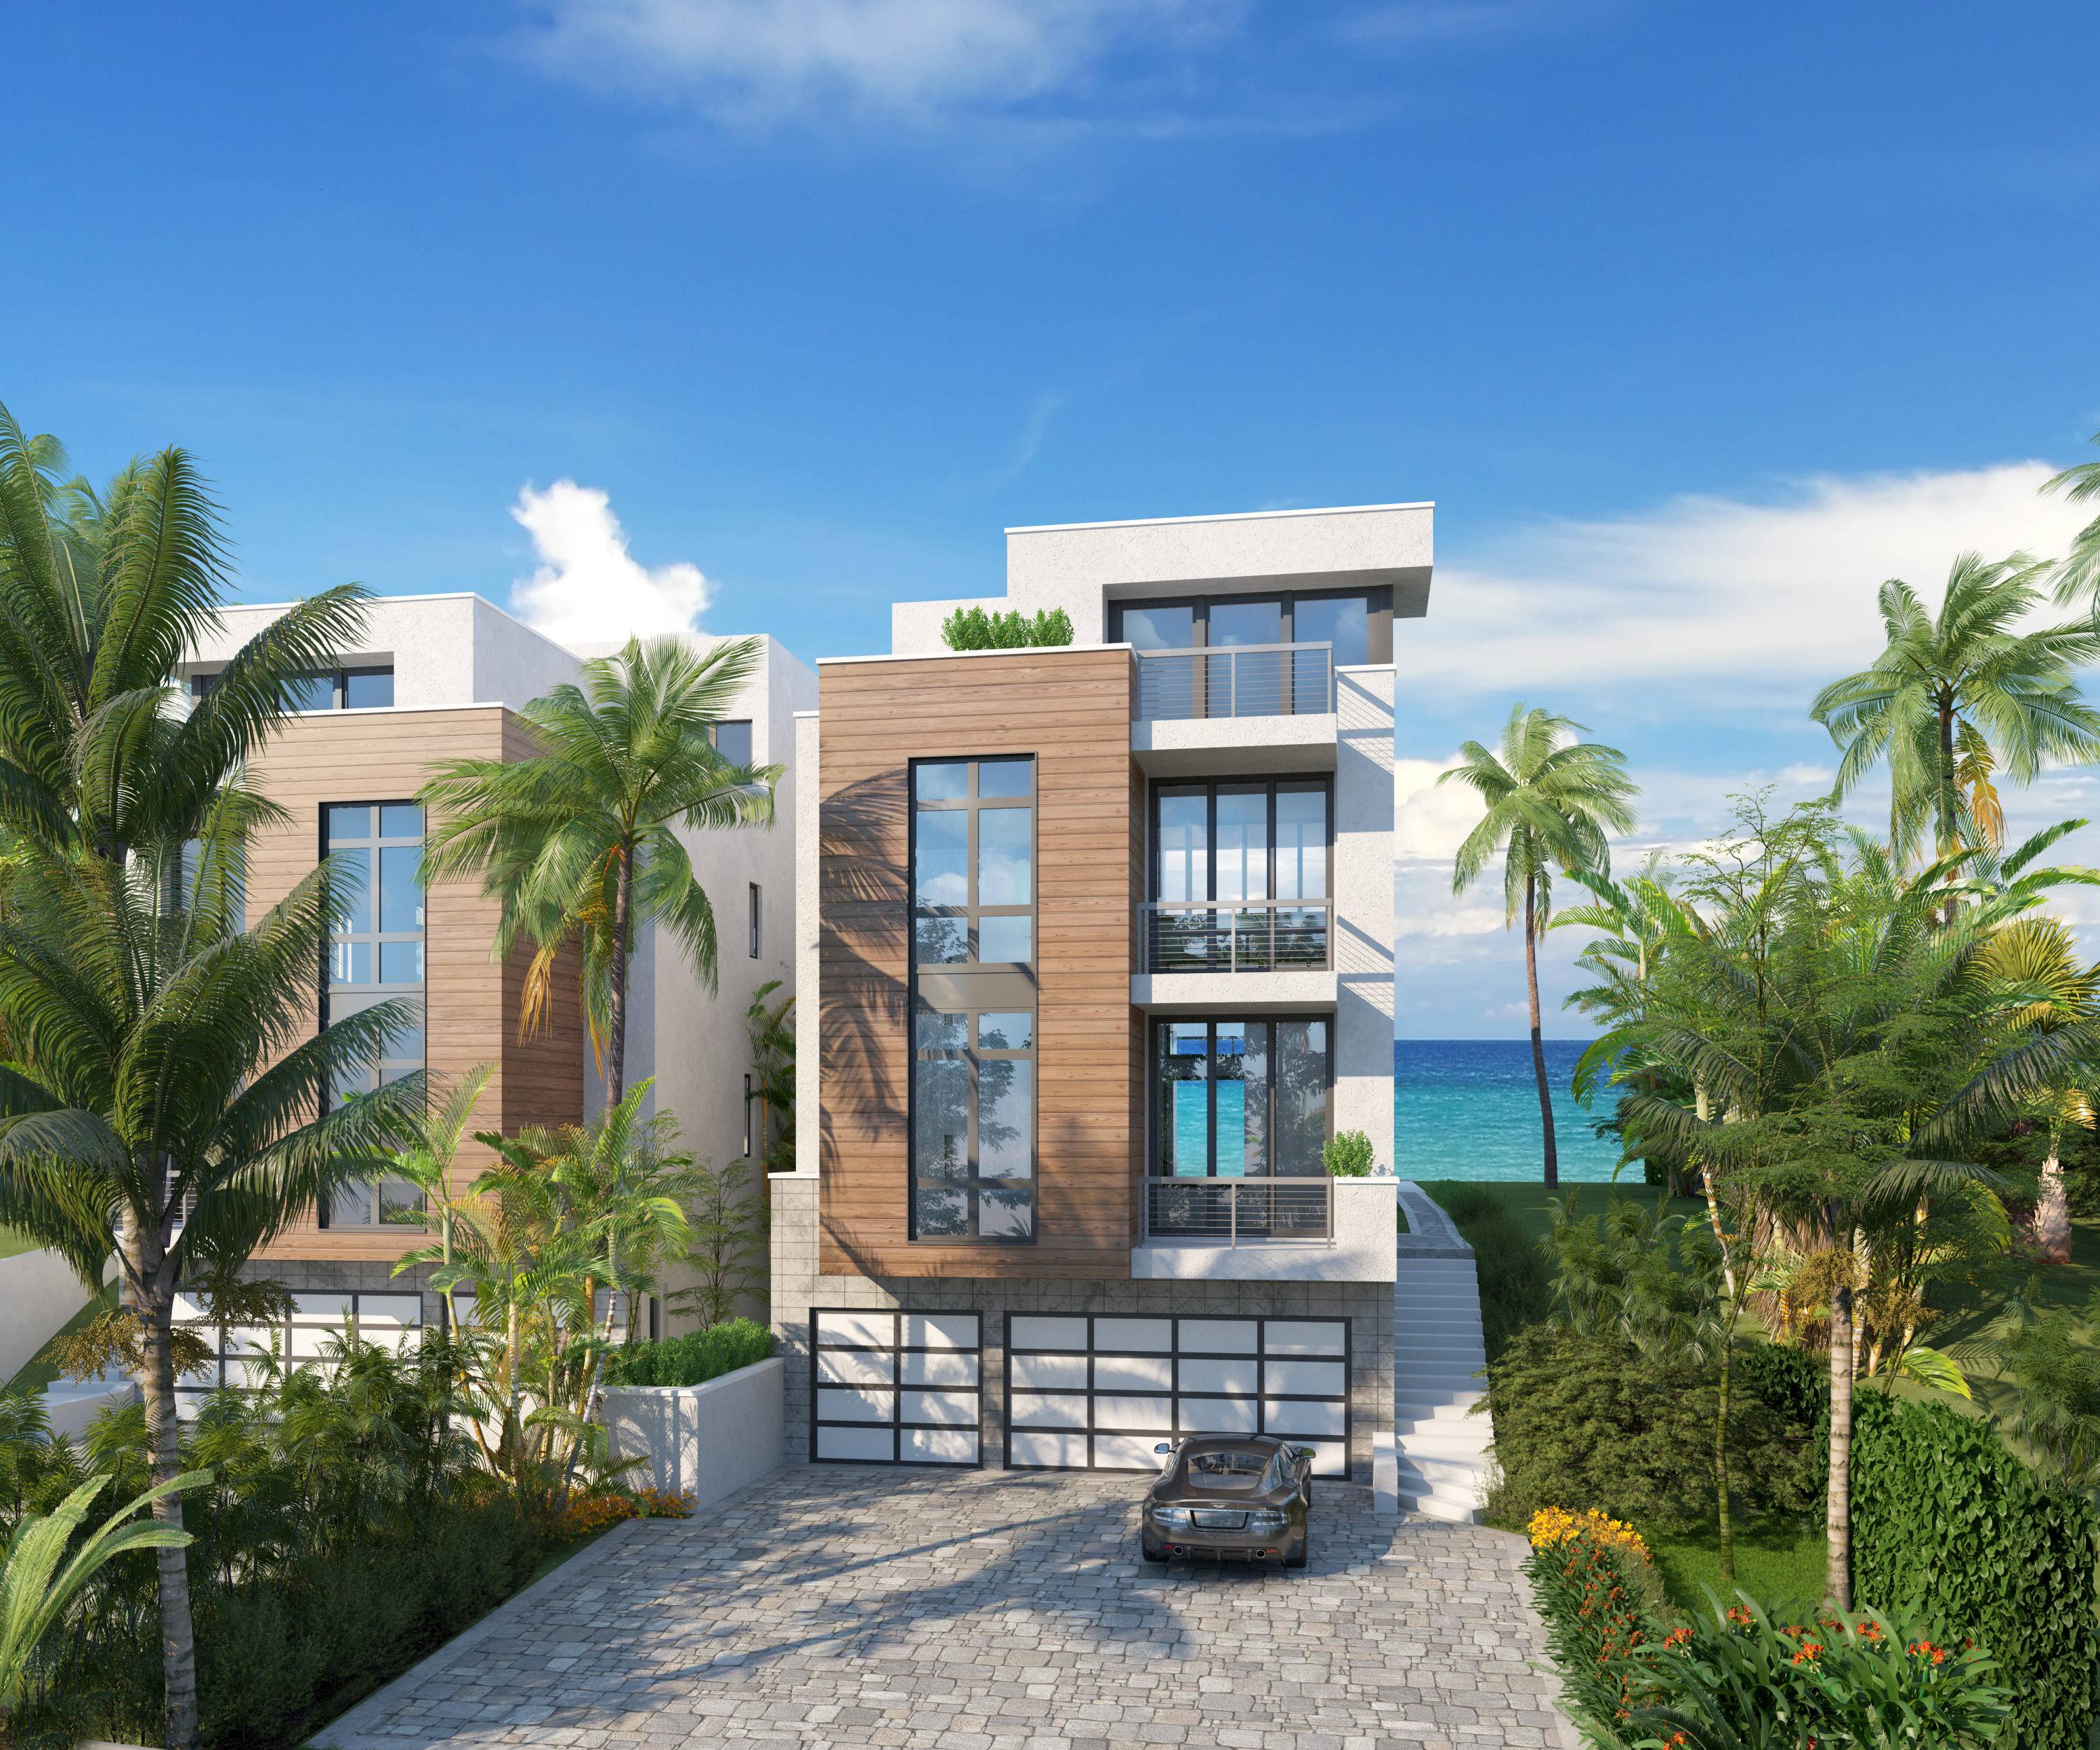 DUE AUGUST 2021, NEW OCEANFRONT GATED ESTATE exudes modern luxury.